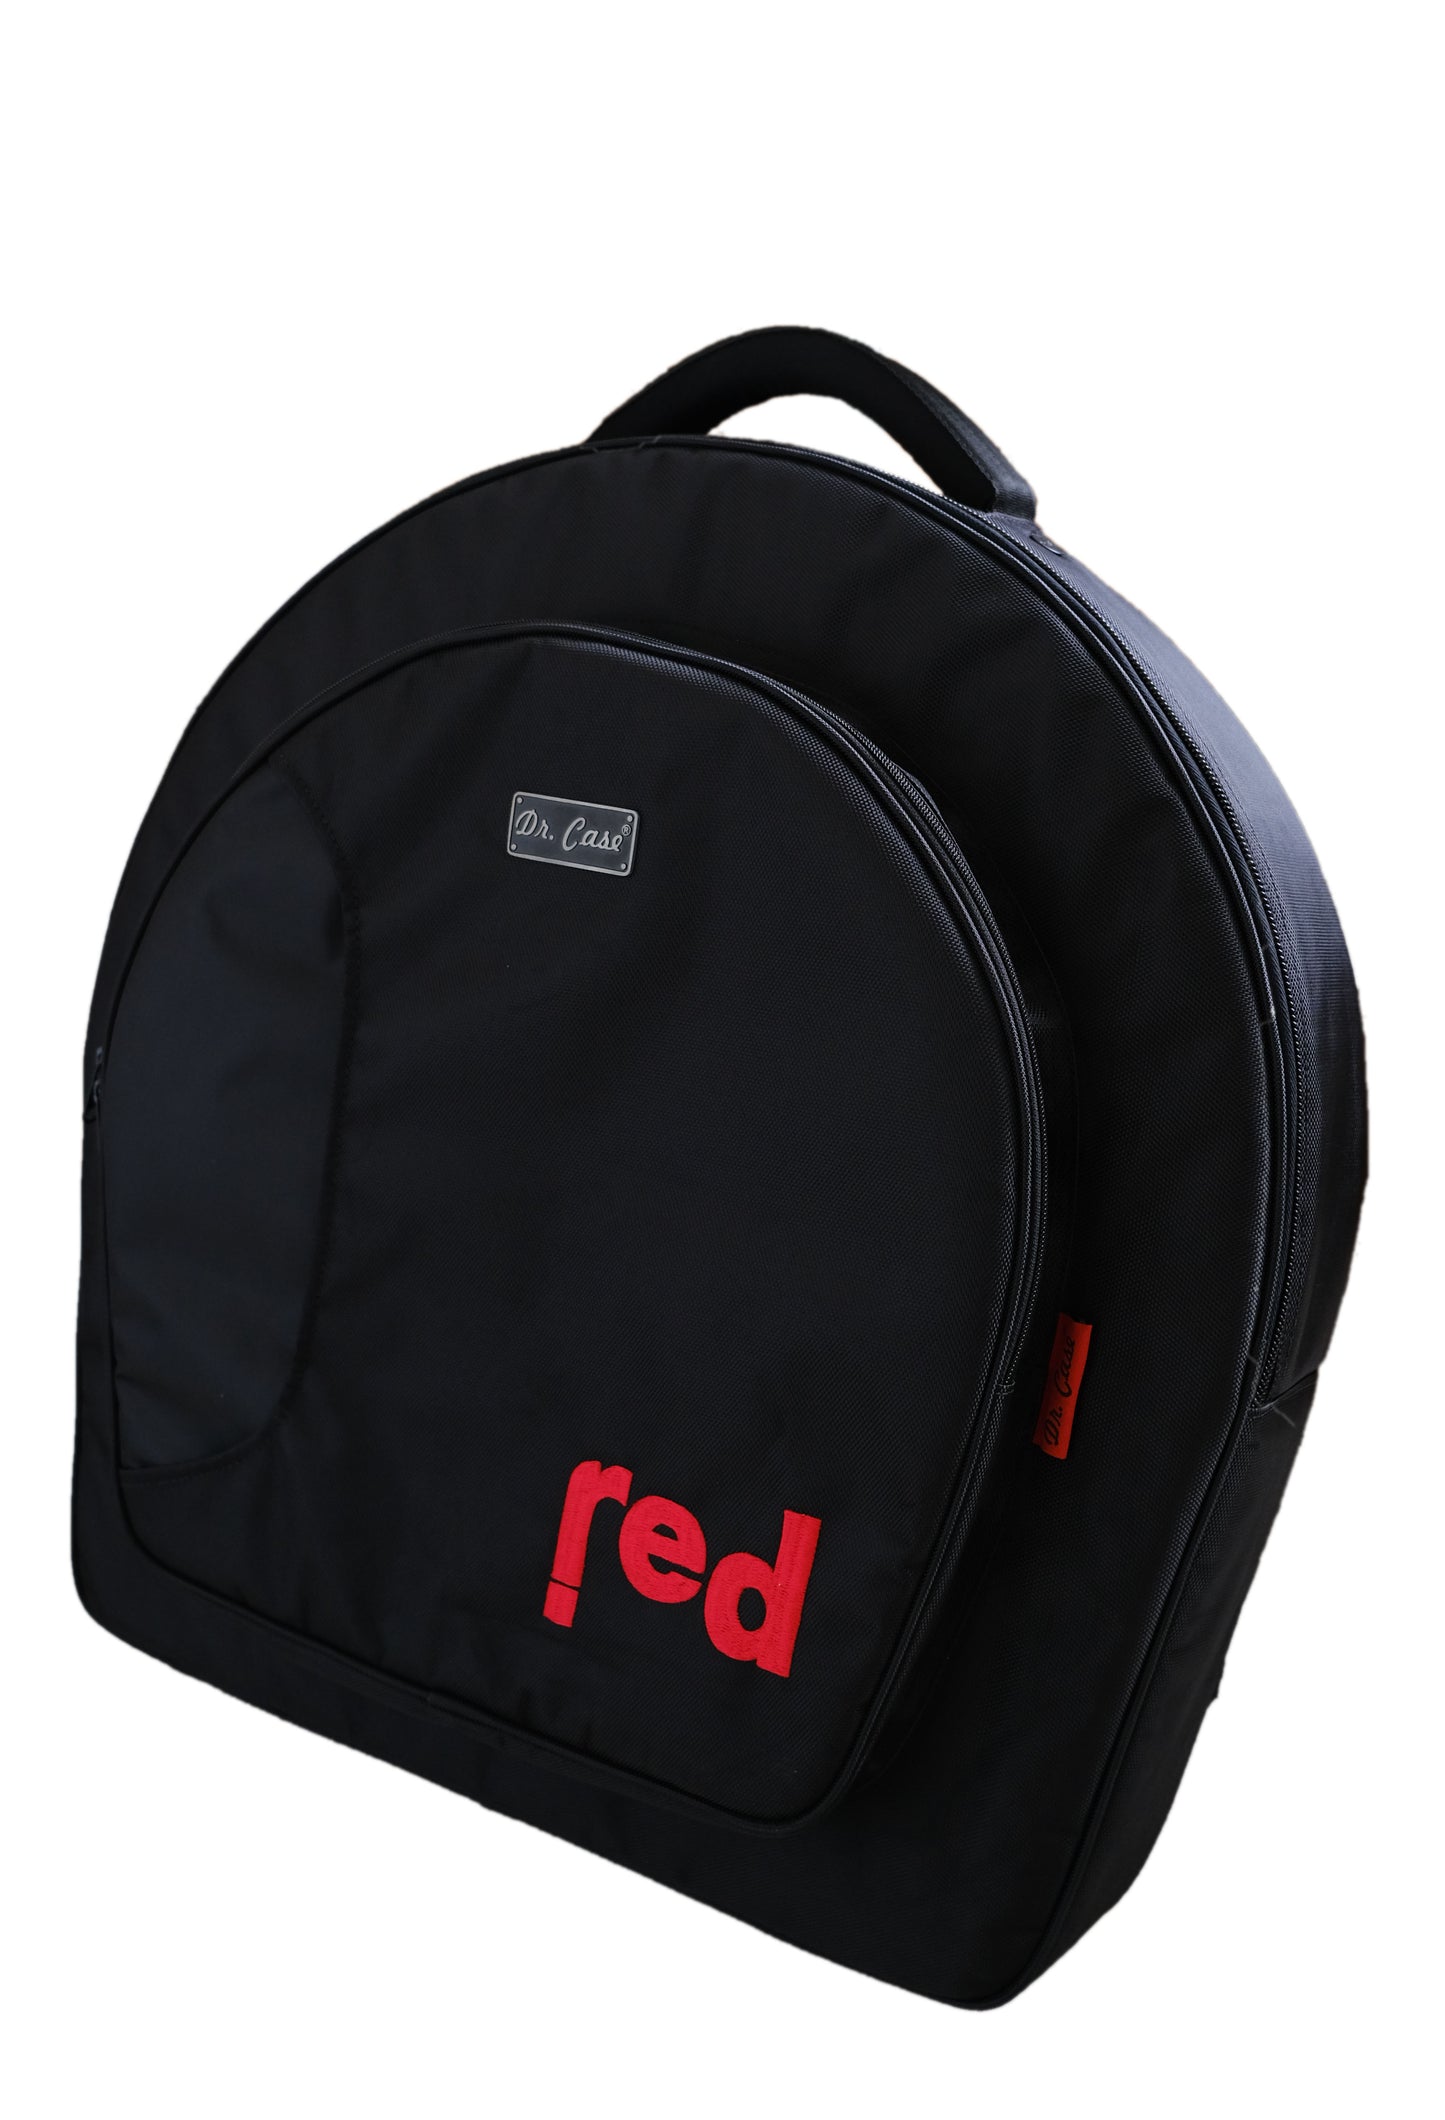 Red Cymbals Deluxe Cymbal Bag / Case Black Colour 22", 24" or 26" sizes.